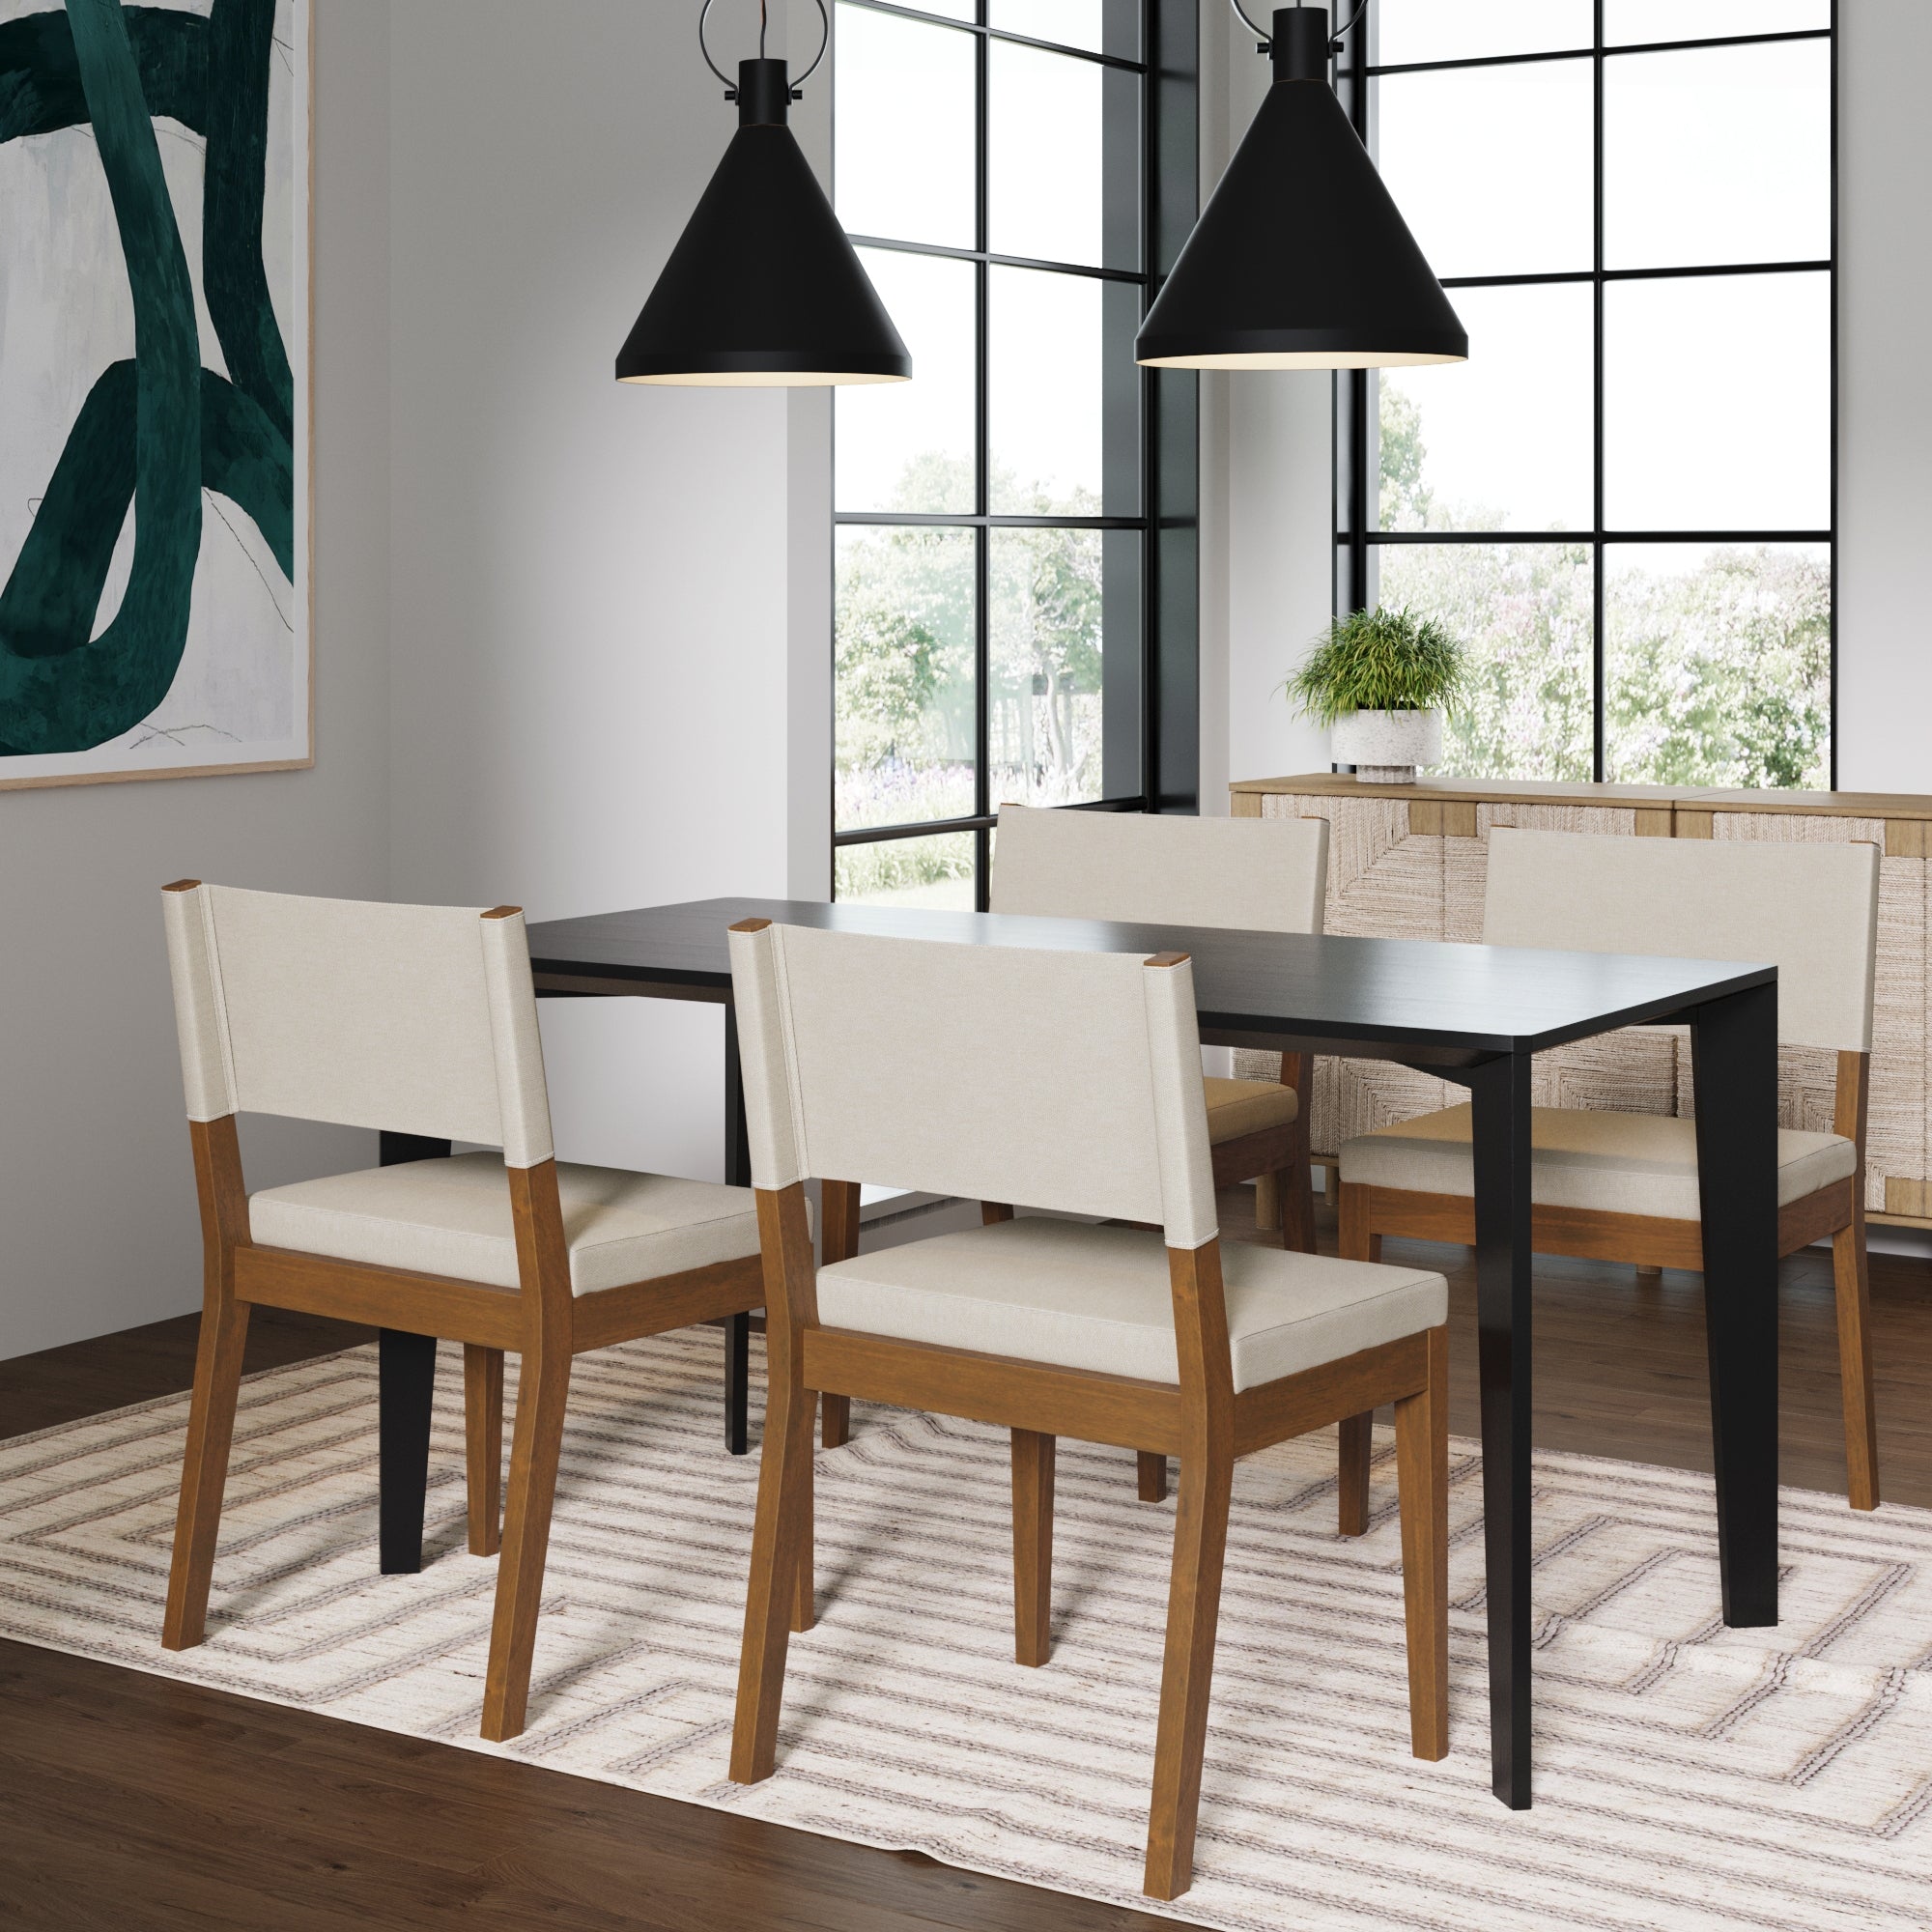 Set of 4 Upholstered Dining Chairs Dark Brown